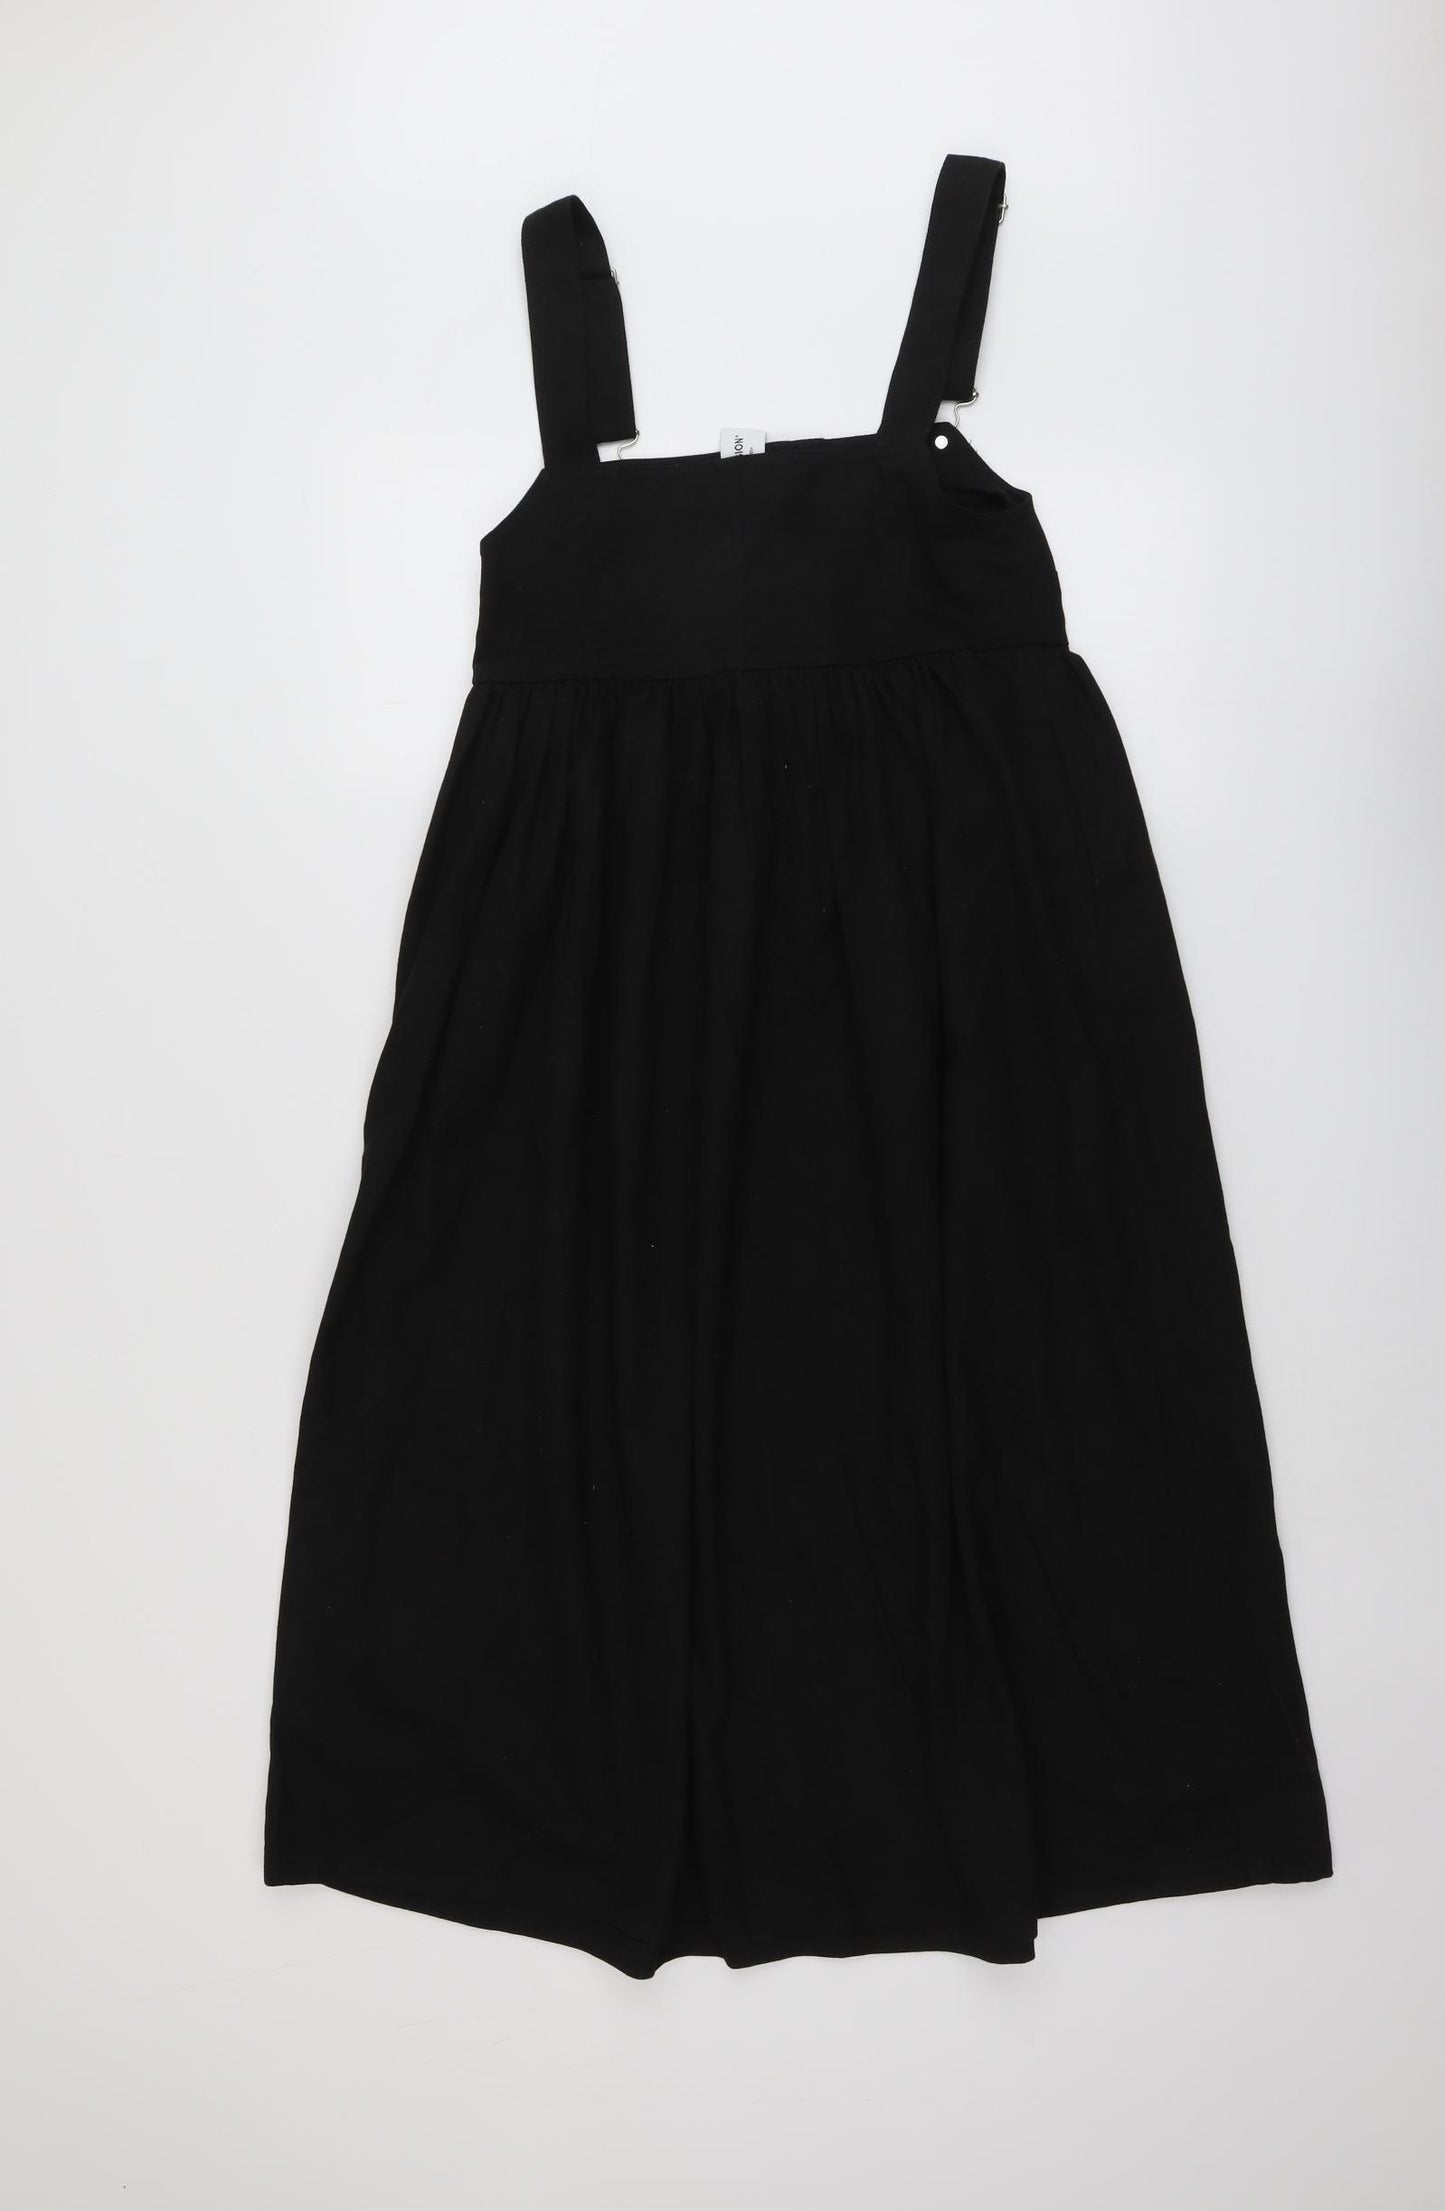 COLLUSION Womens Black Cotton Pinafore/Dungaree Dress Size 6 Square Neck Buckle